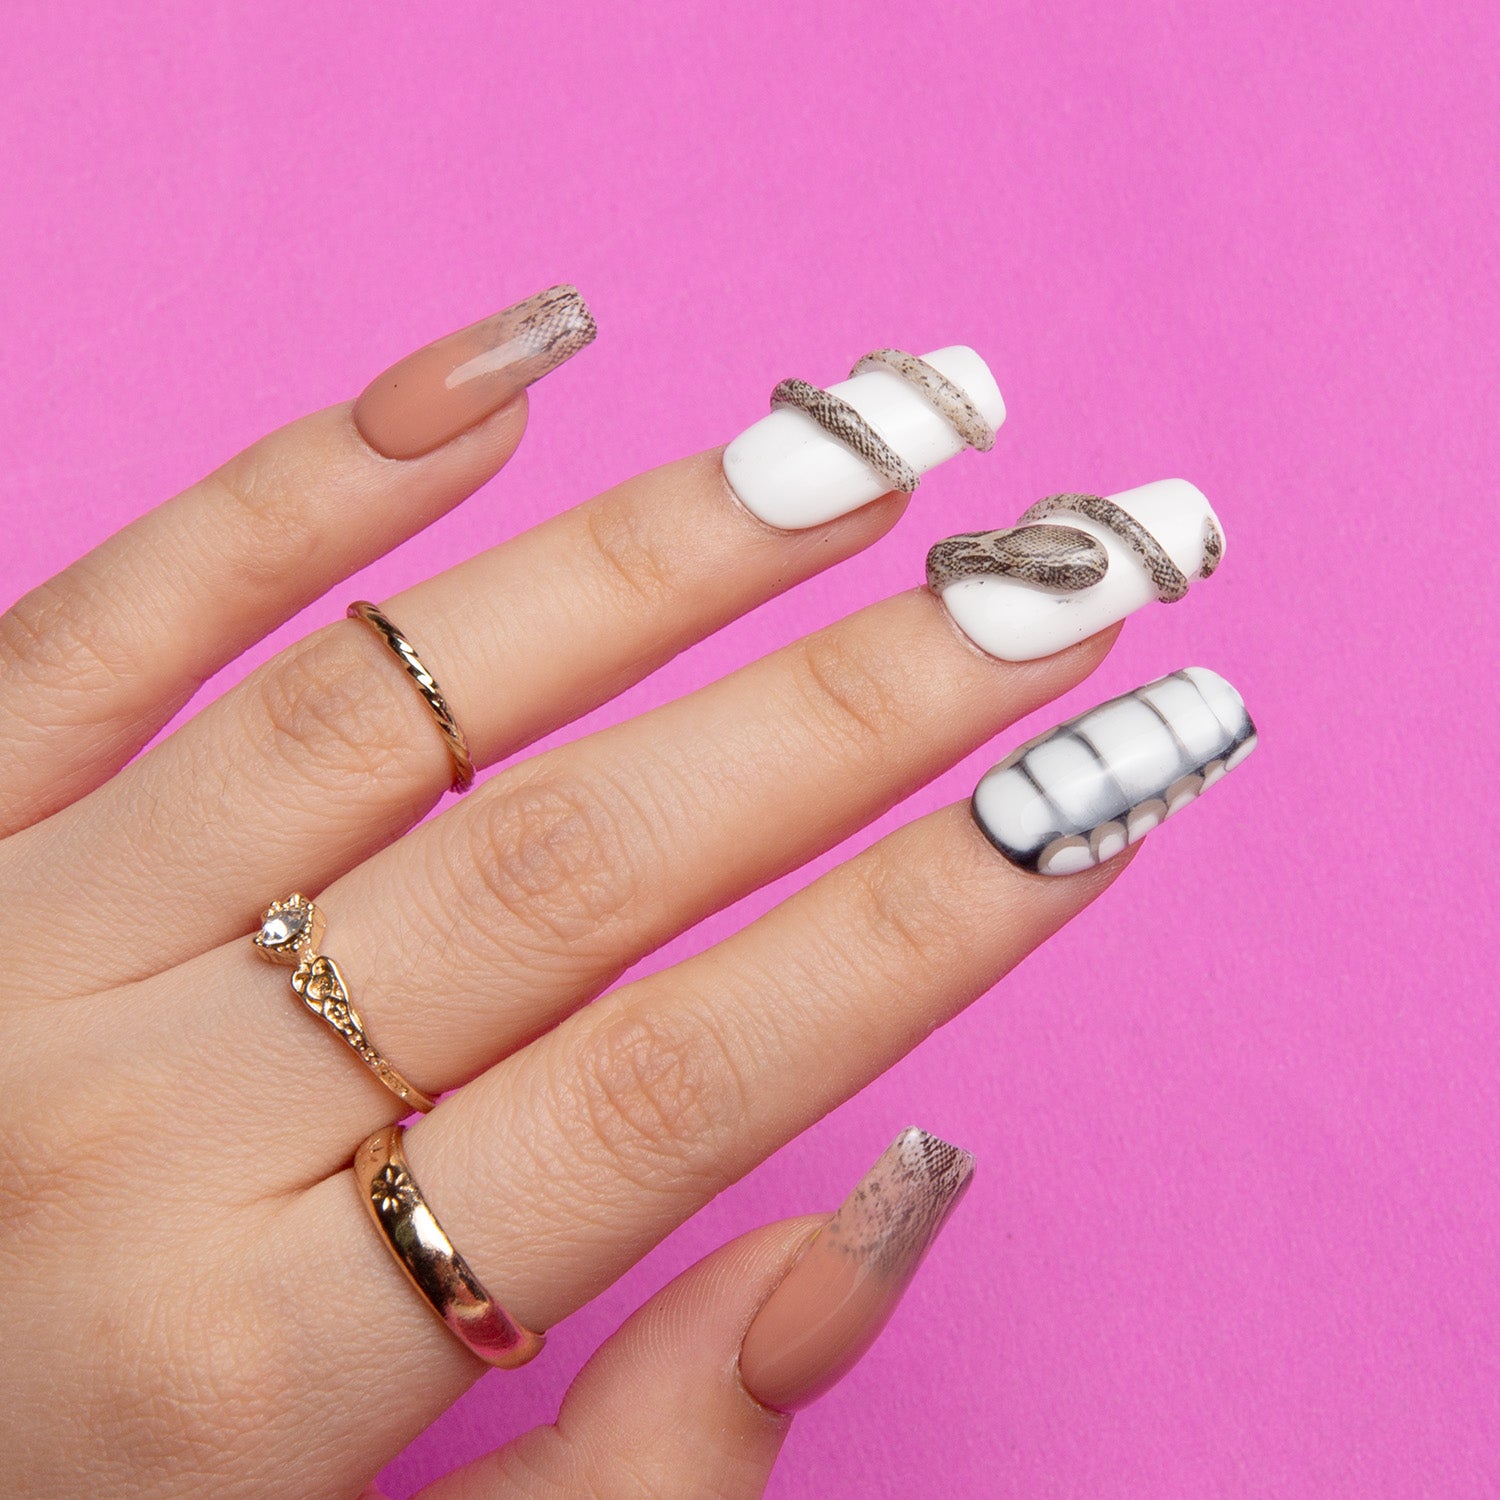 'Sahara' press-on nail set by Lovful.com showcasing white base nails with a subtle sand effect and snake design, displayed on a hand with gold rings against a pink background.